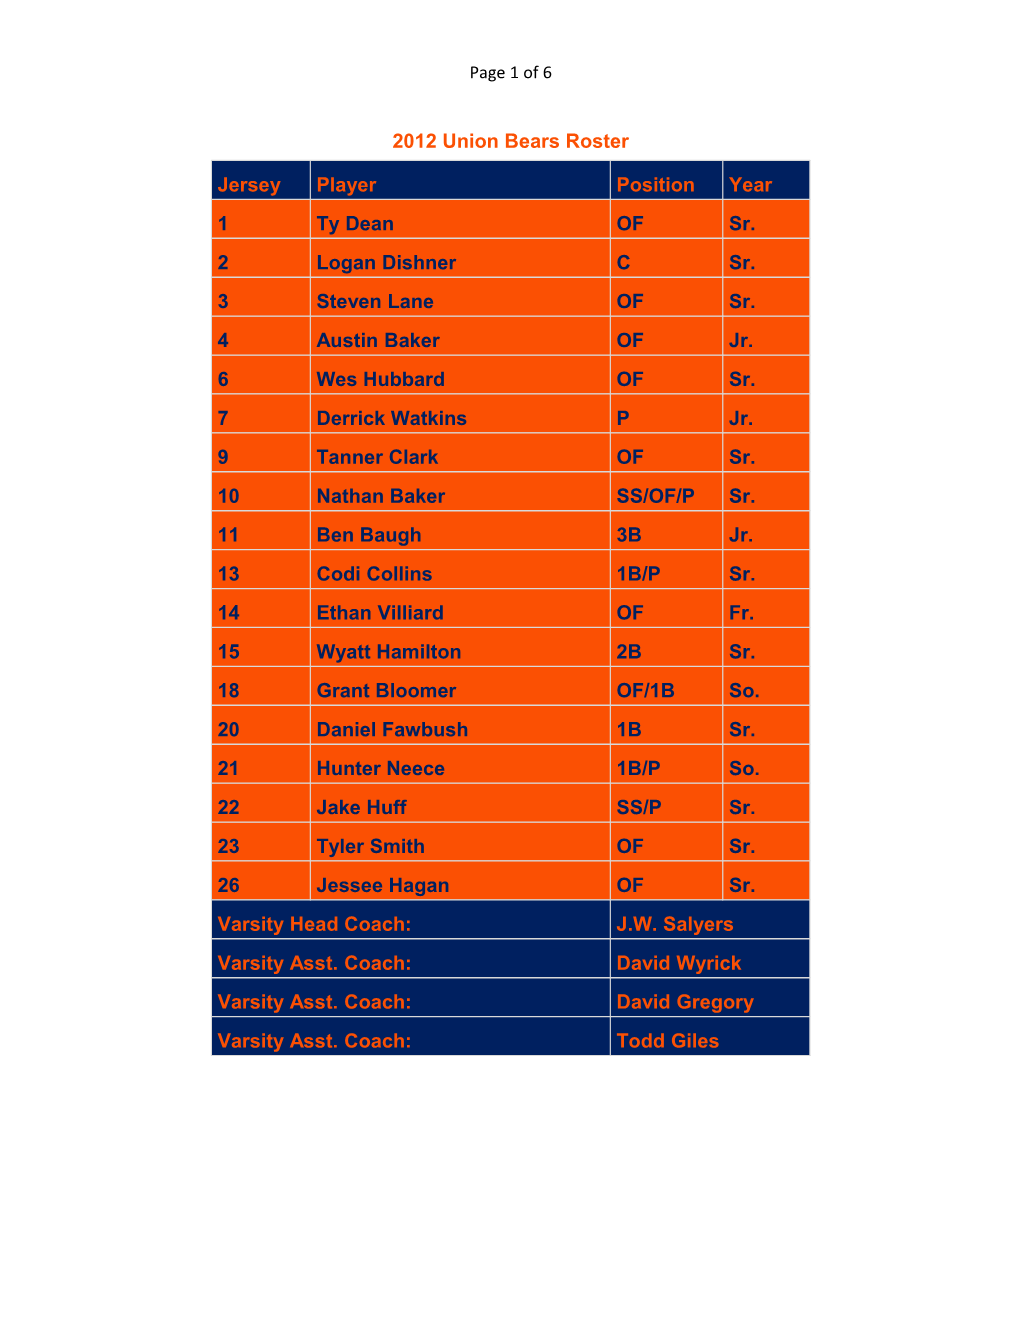 2012 Union Bears Roster